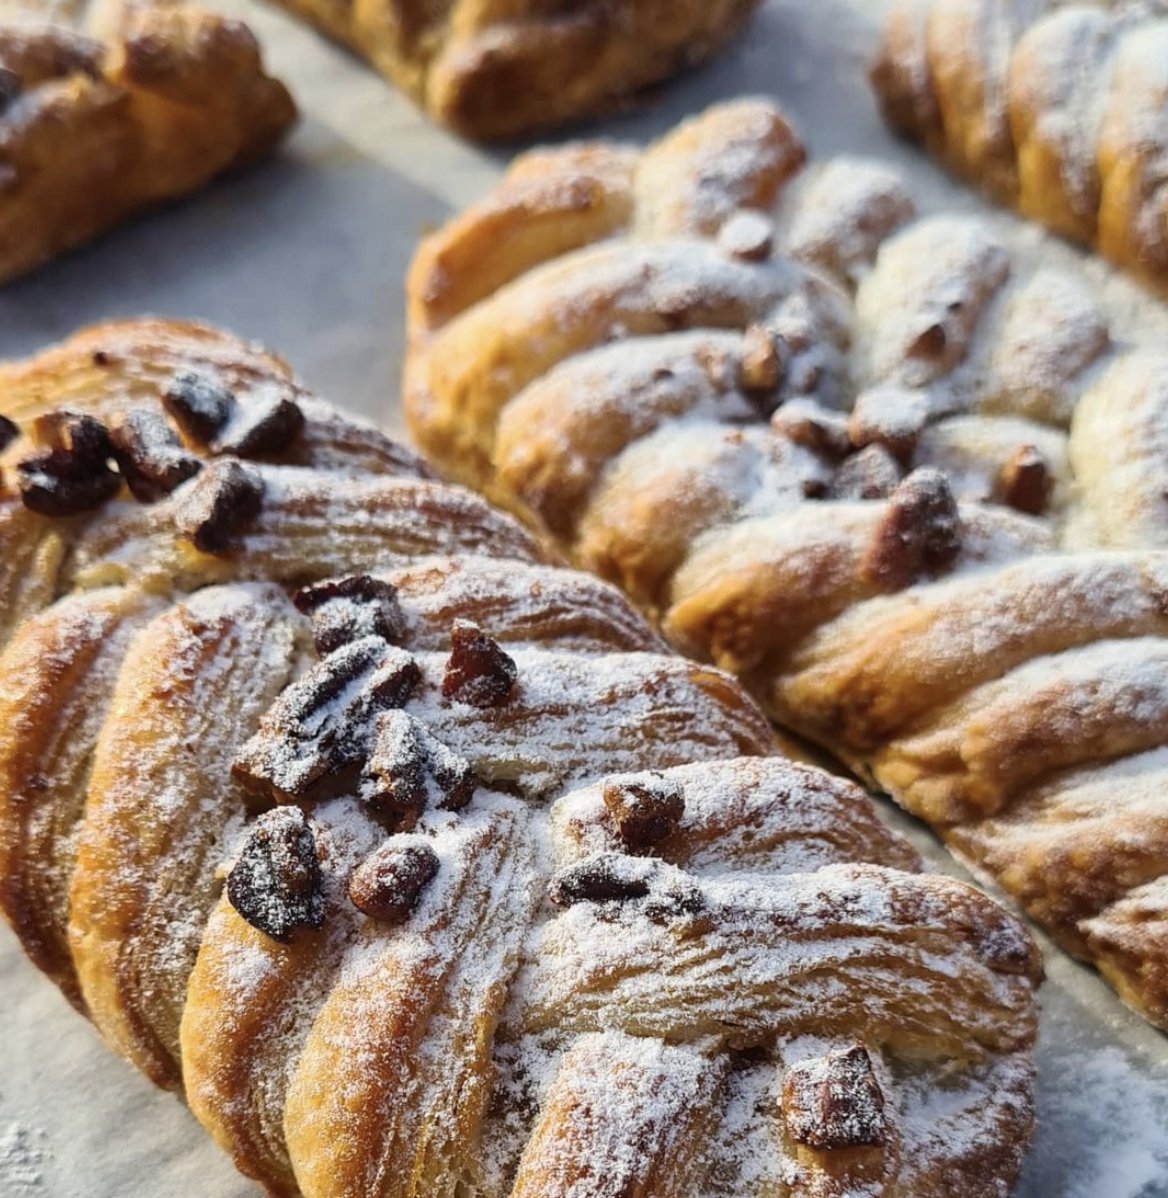 Indulge in the Sweet and Nutty Delight of Our Pecan Pastries!' 🥐🍯
#PecanPastries #BakeryLove #SweetTreats #NuttyDelight #MorningIndulgence  #PastryLove #Foodie #Yum #BakeryTreats  #Gala #bakerscorner